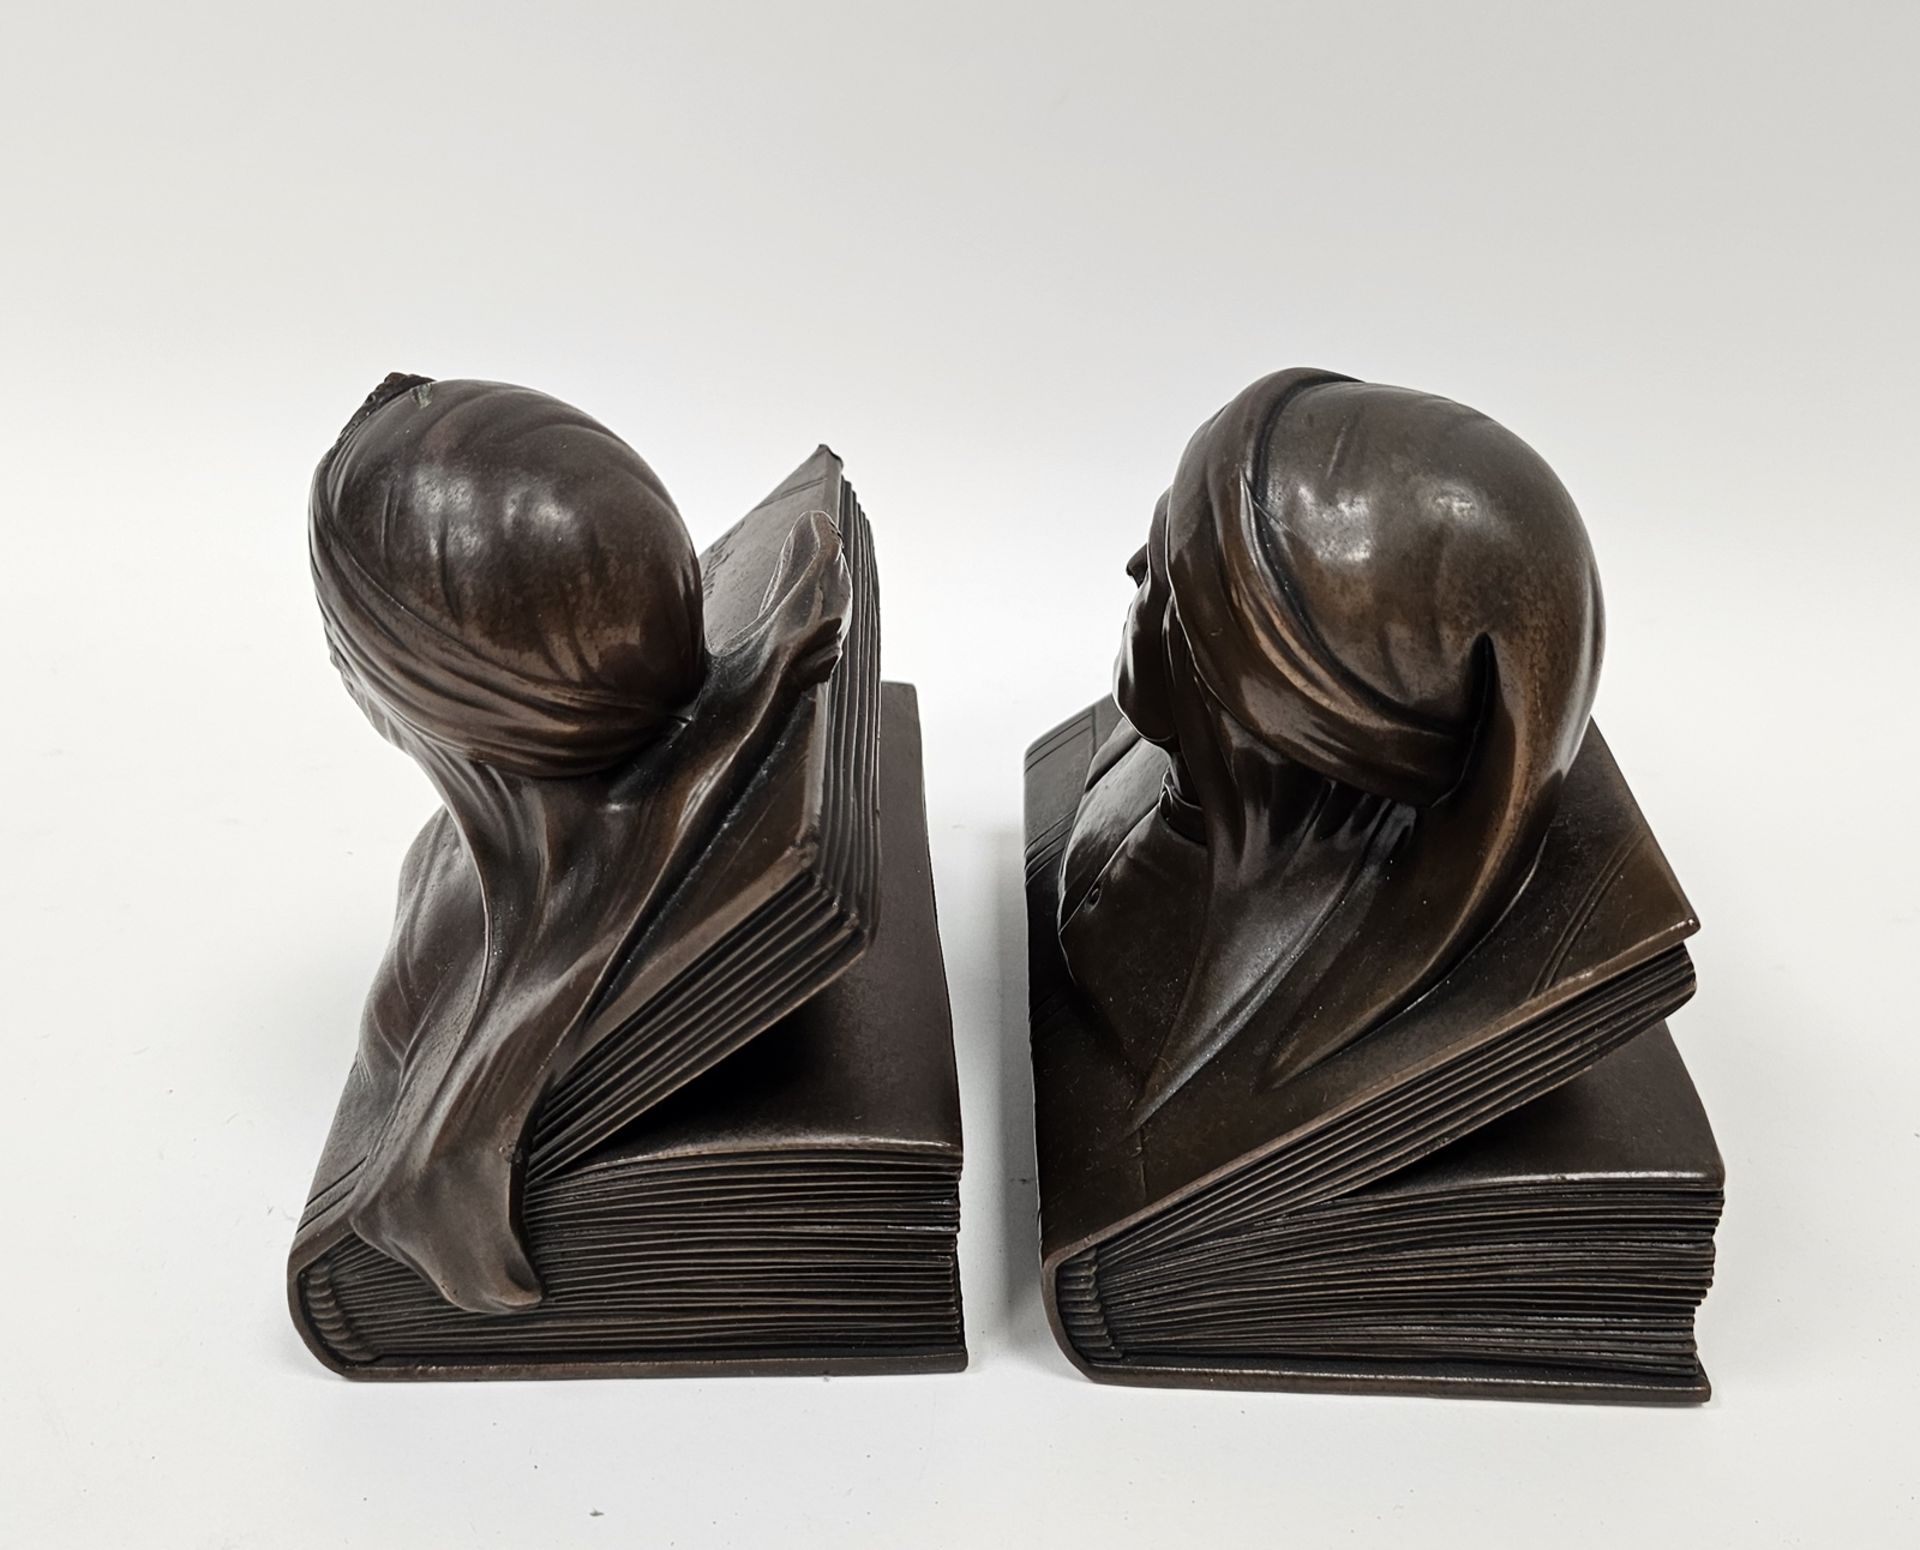 Pair bronze-effect book ends in the form of Beatrice and Dante busts, each 15cm wide x 15cm high x - Image 2 of 2